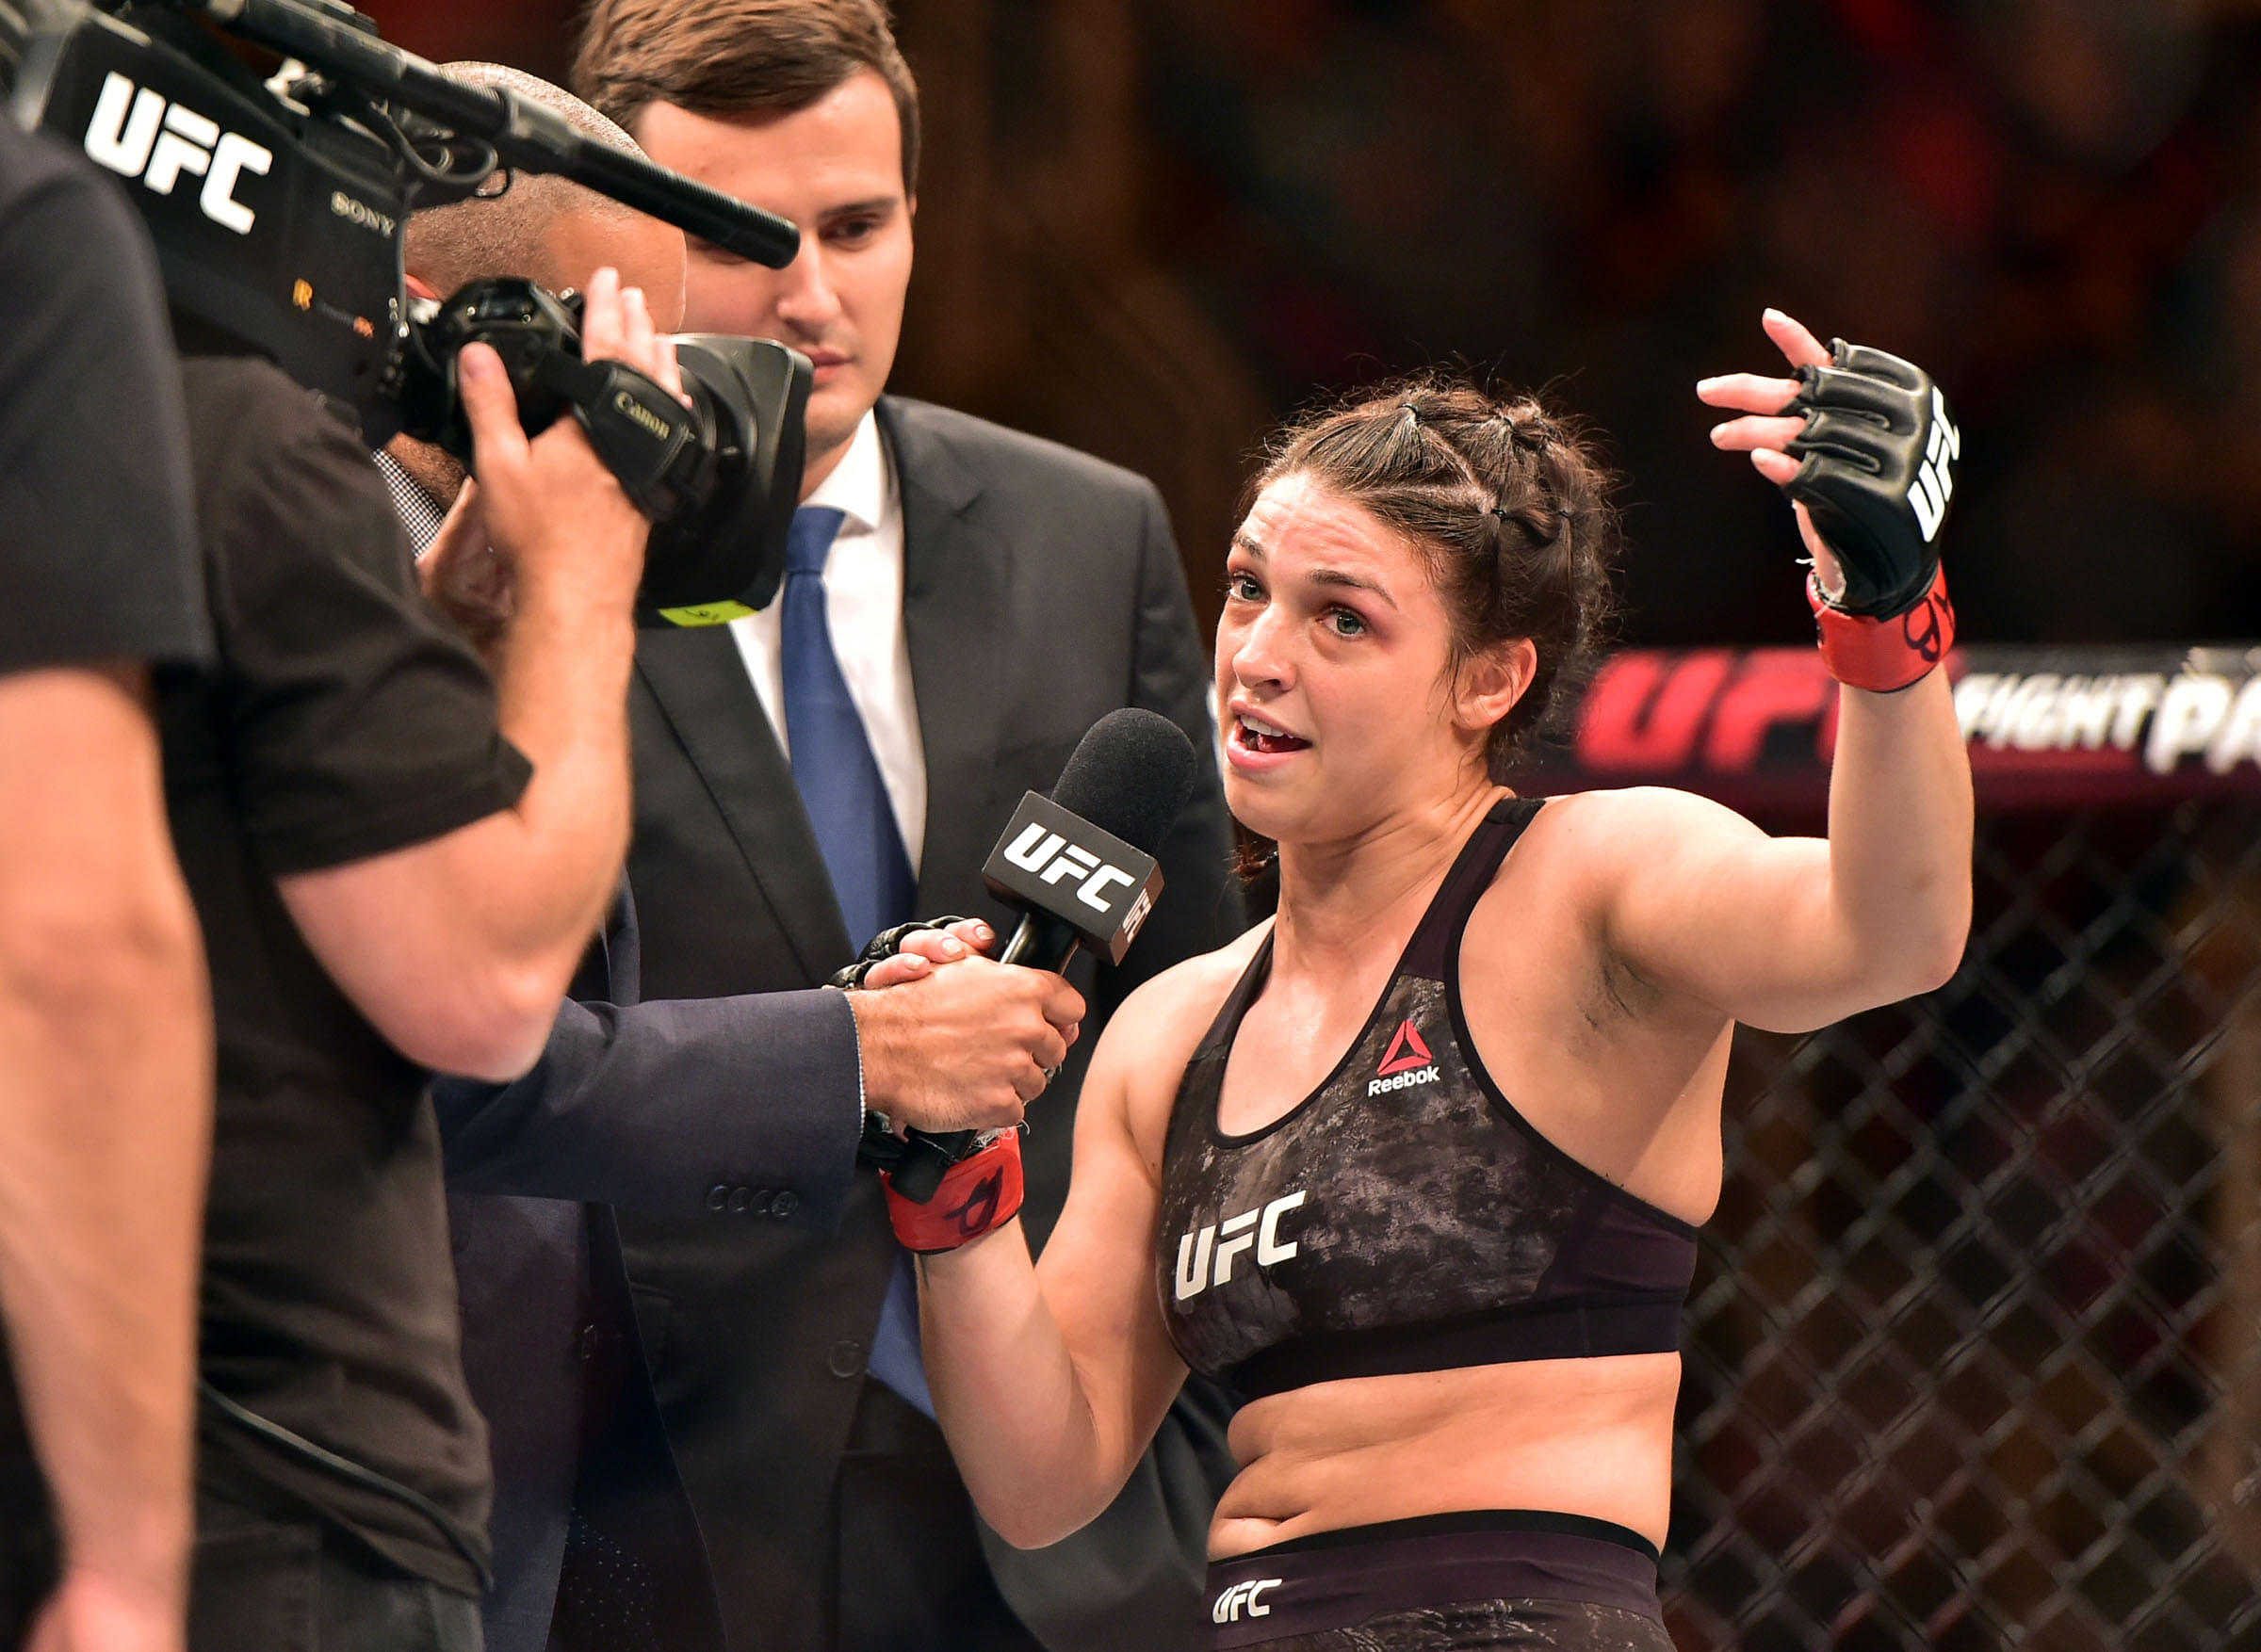 Everything we know about Mackenzie Dern’s father who taught her Jiu Jitsu